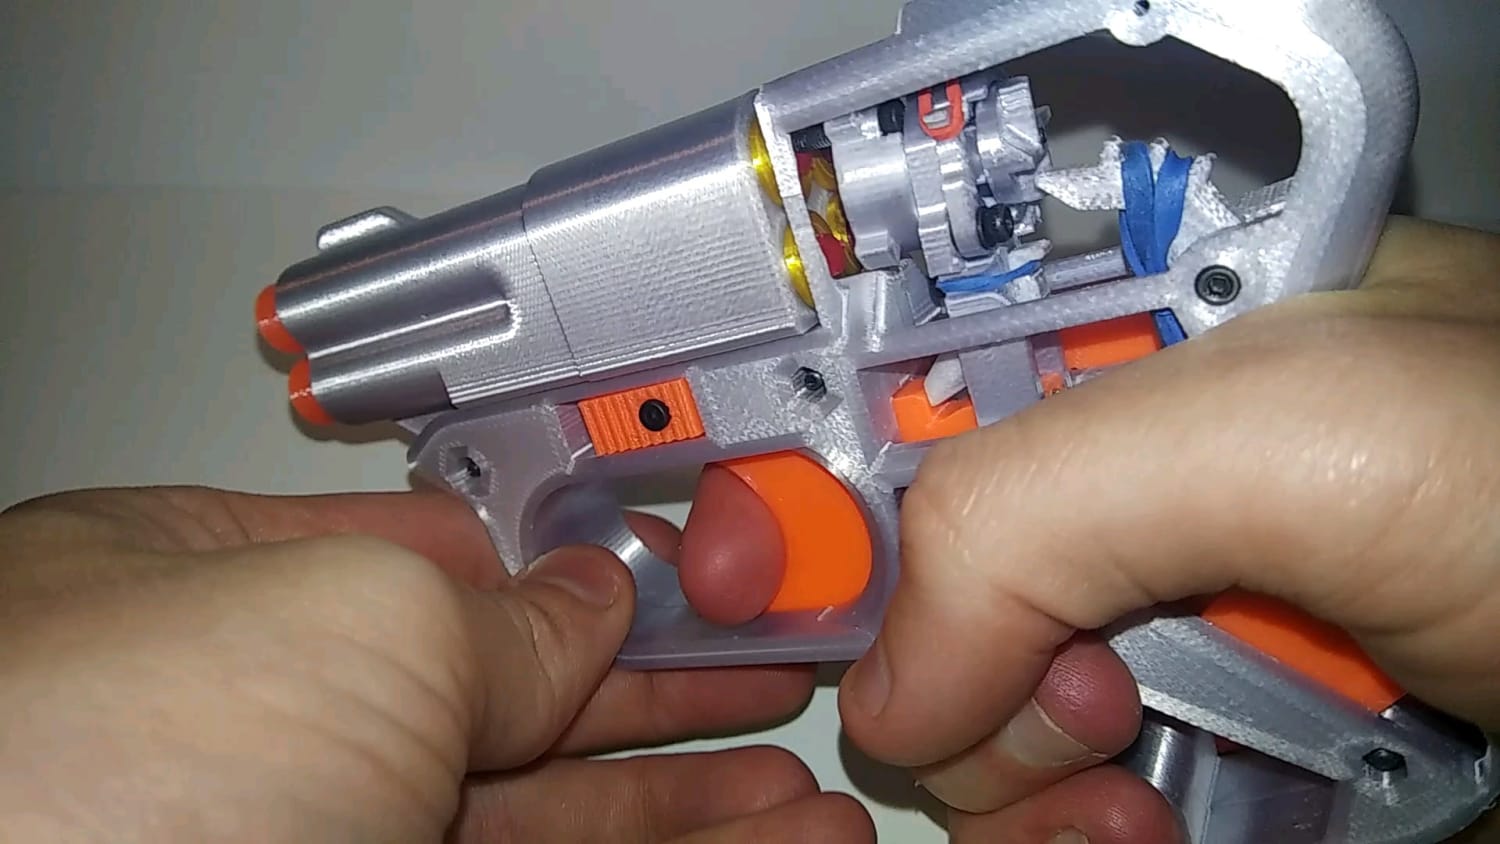 A really neat double action trigger mechanism for a toy pepperbox derringer pistol.